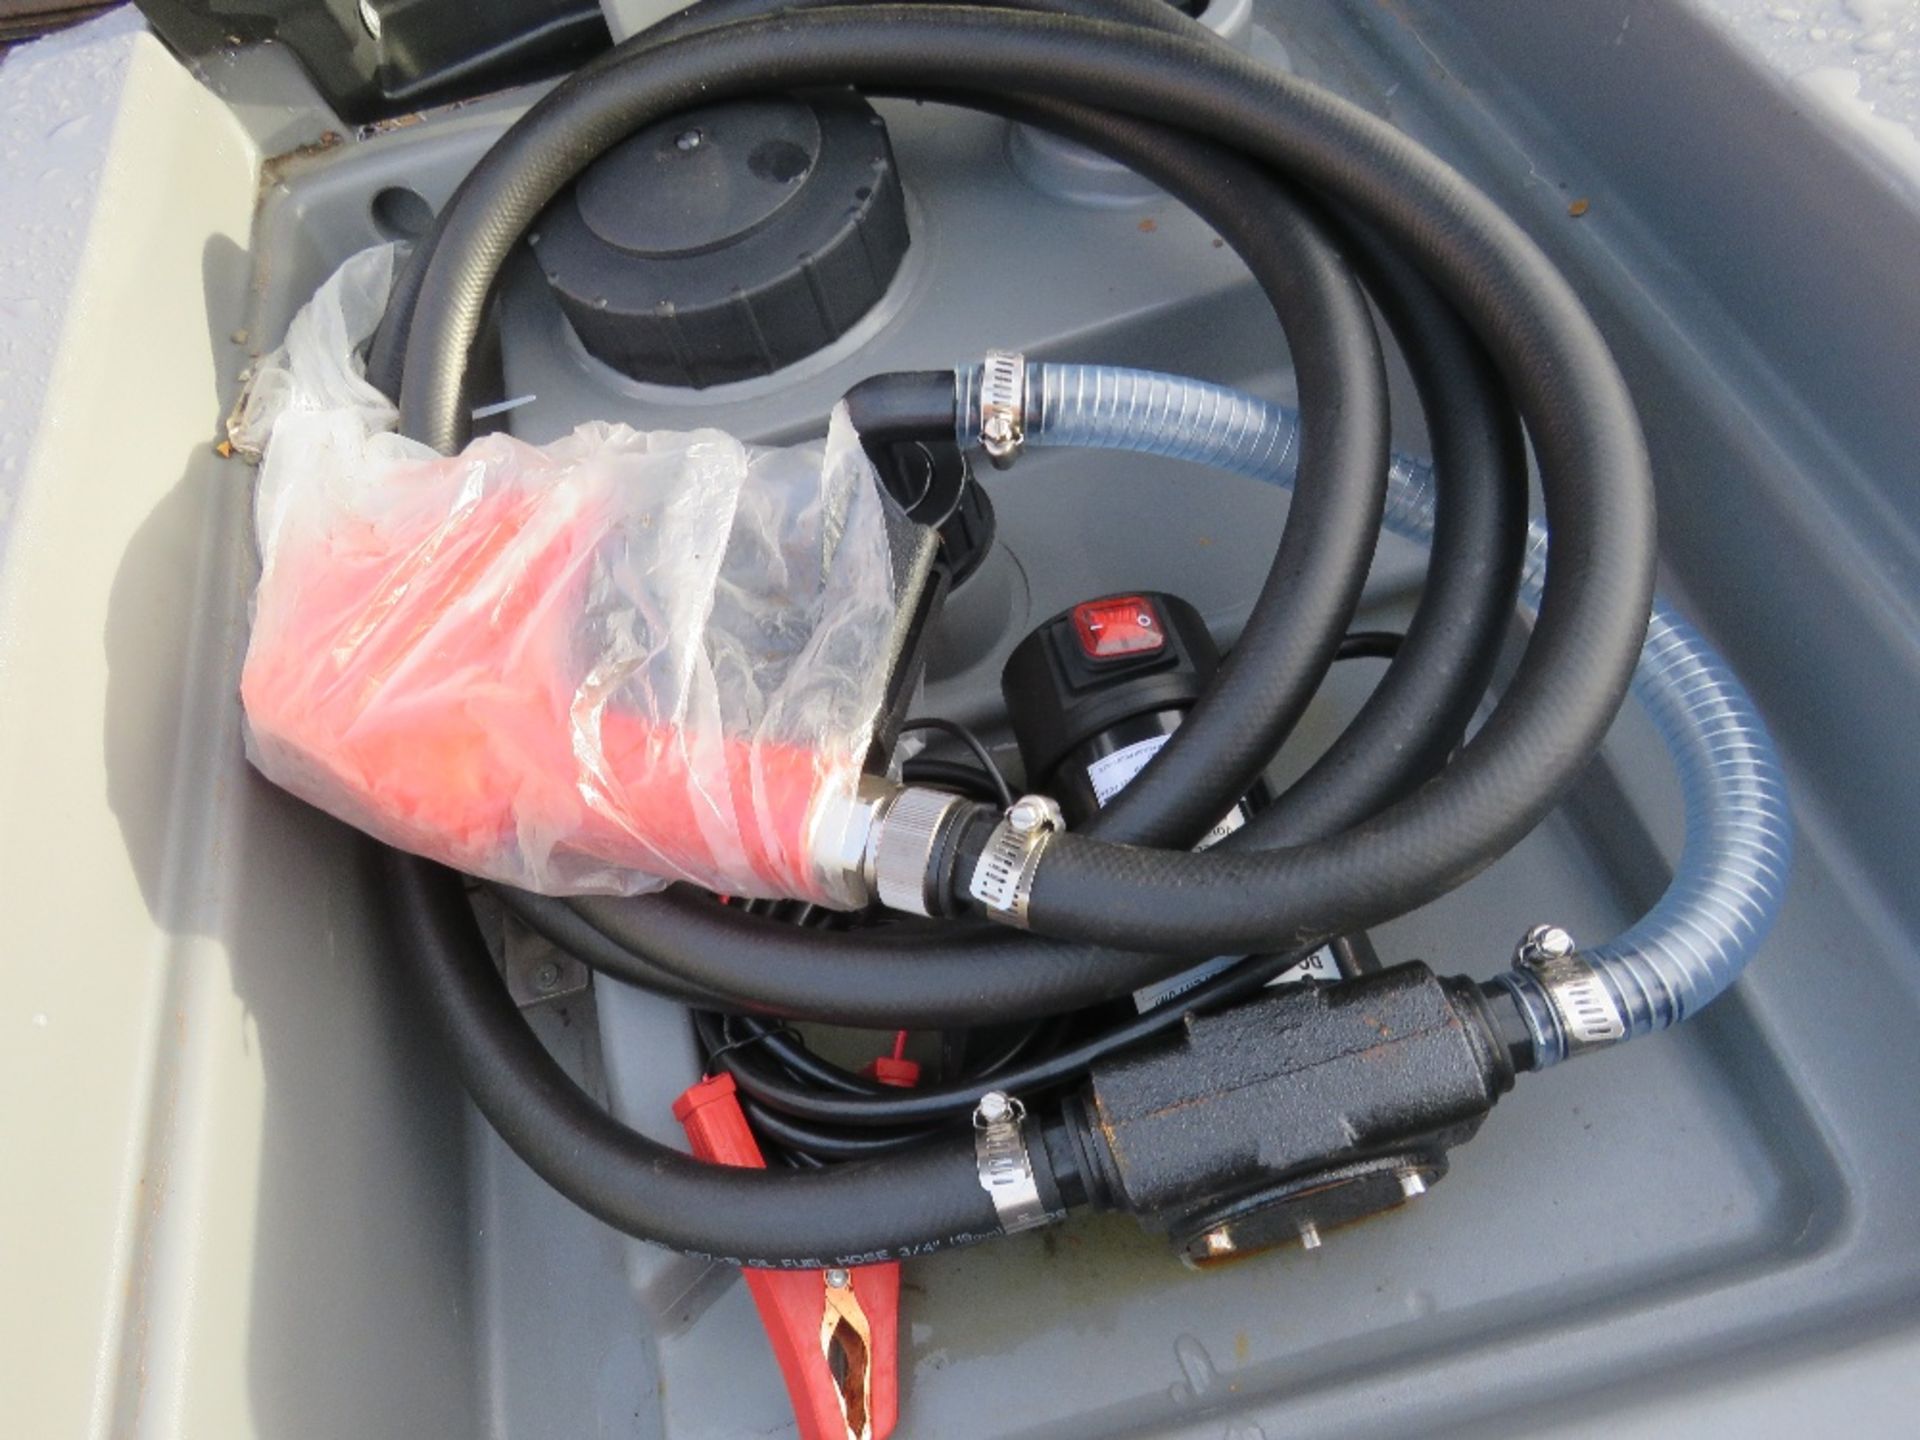 MINI BOWSER FOR PICKUP TRUCK ETC. WITH 12V PUMP. APPEARS LITTLE/UNUSED. - Image 3 of 3